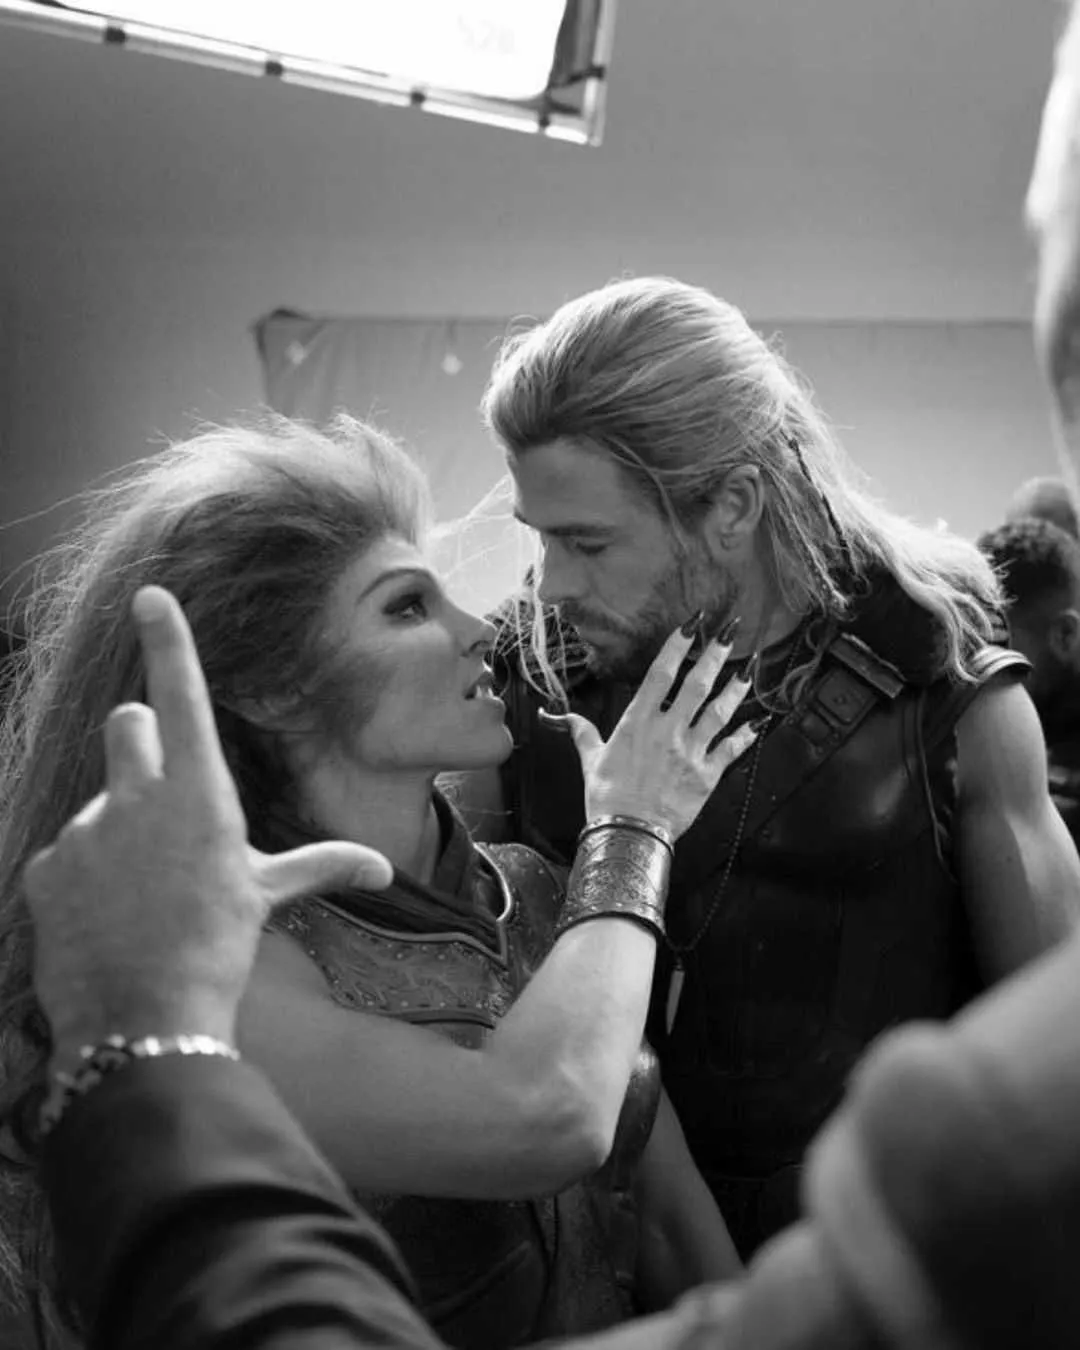 New behind-the-scenes photos of Chris Hemsworth's wife Elsa Pataky in 'Thor: Love and Thunder' cameo | FMV6